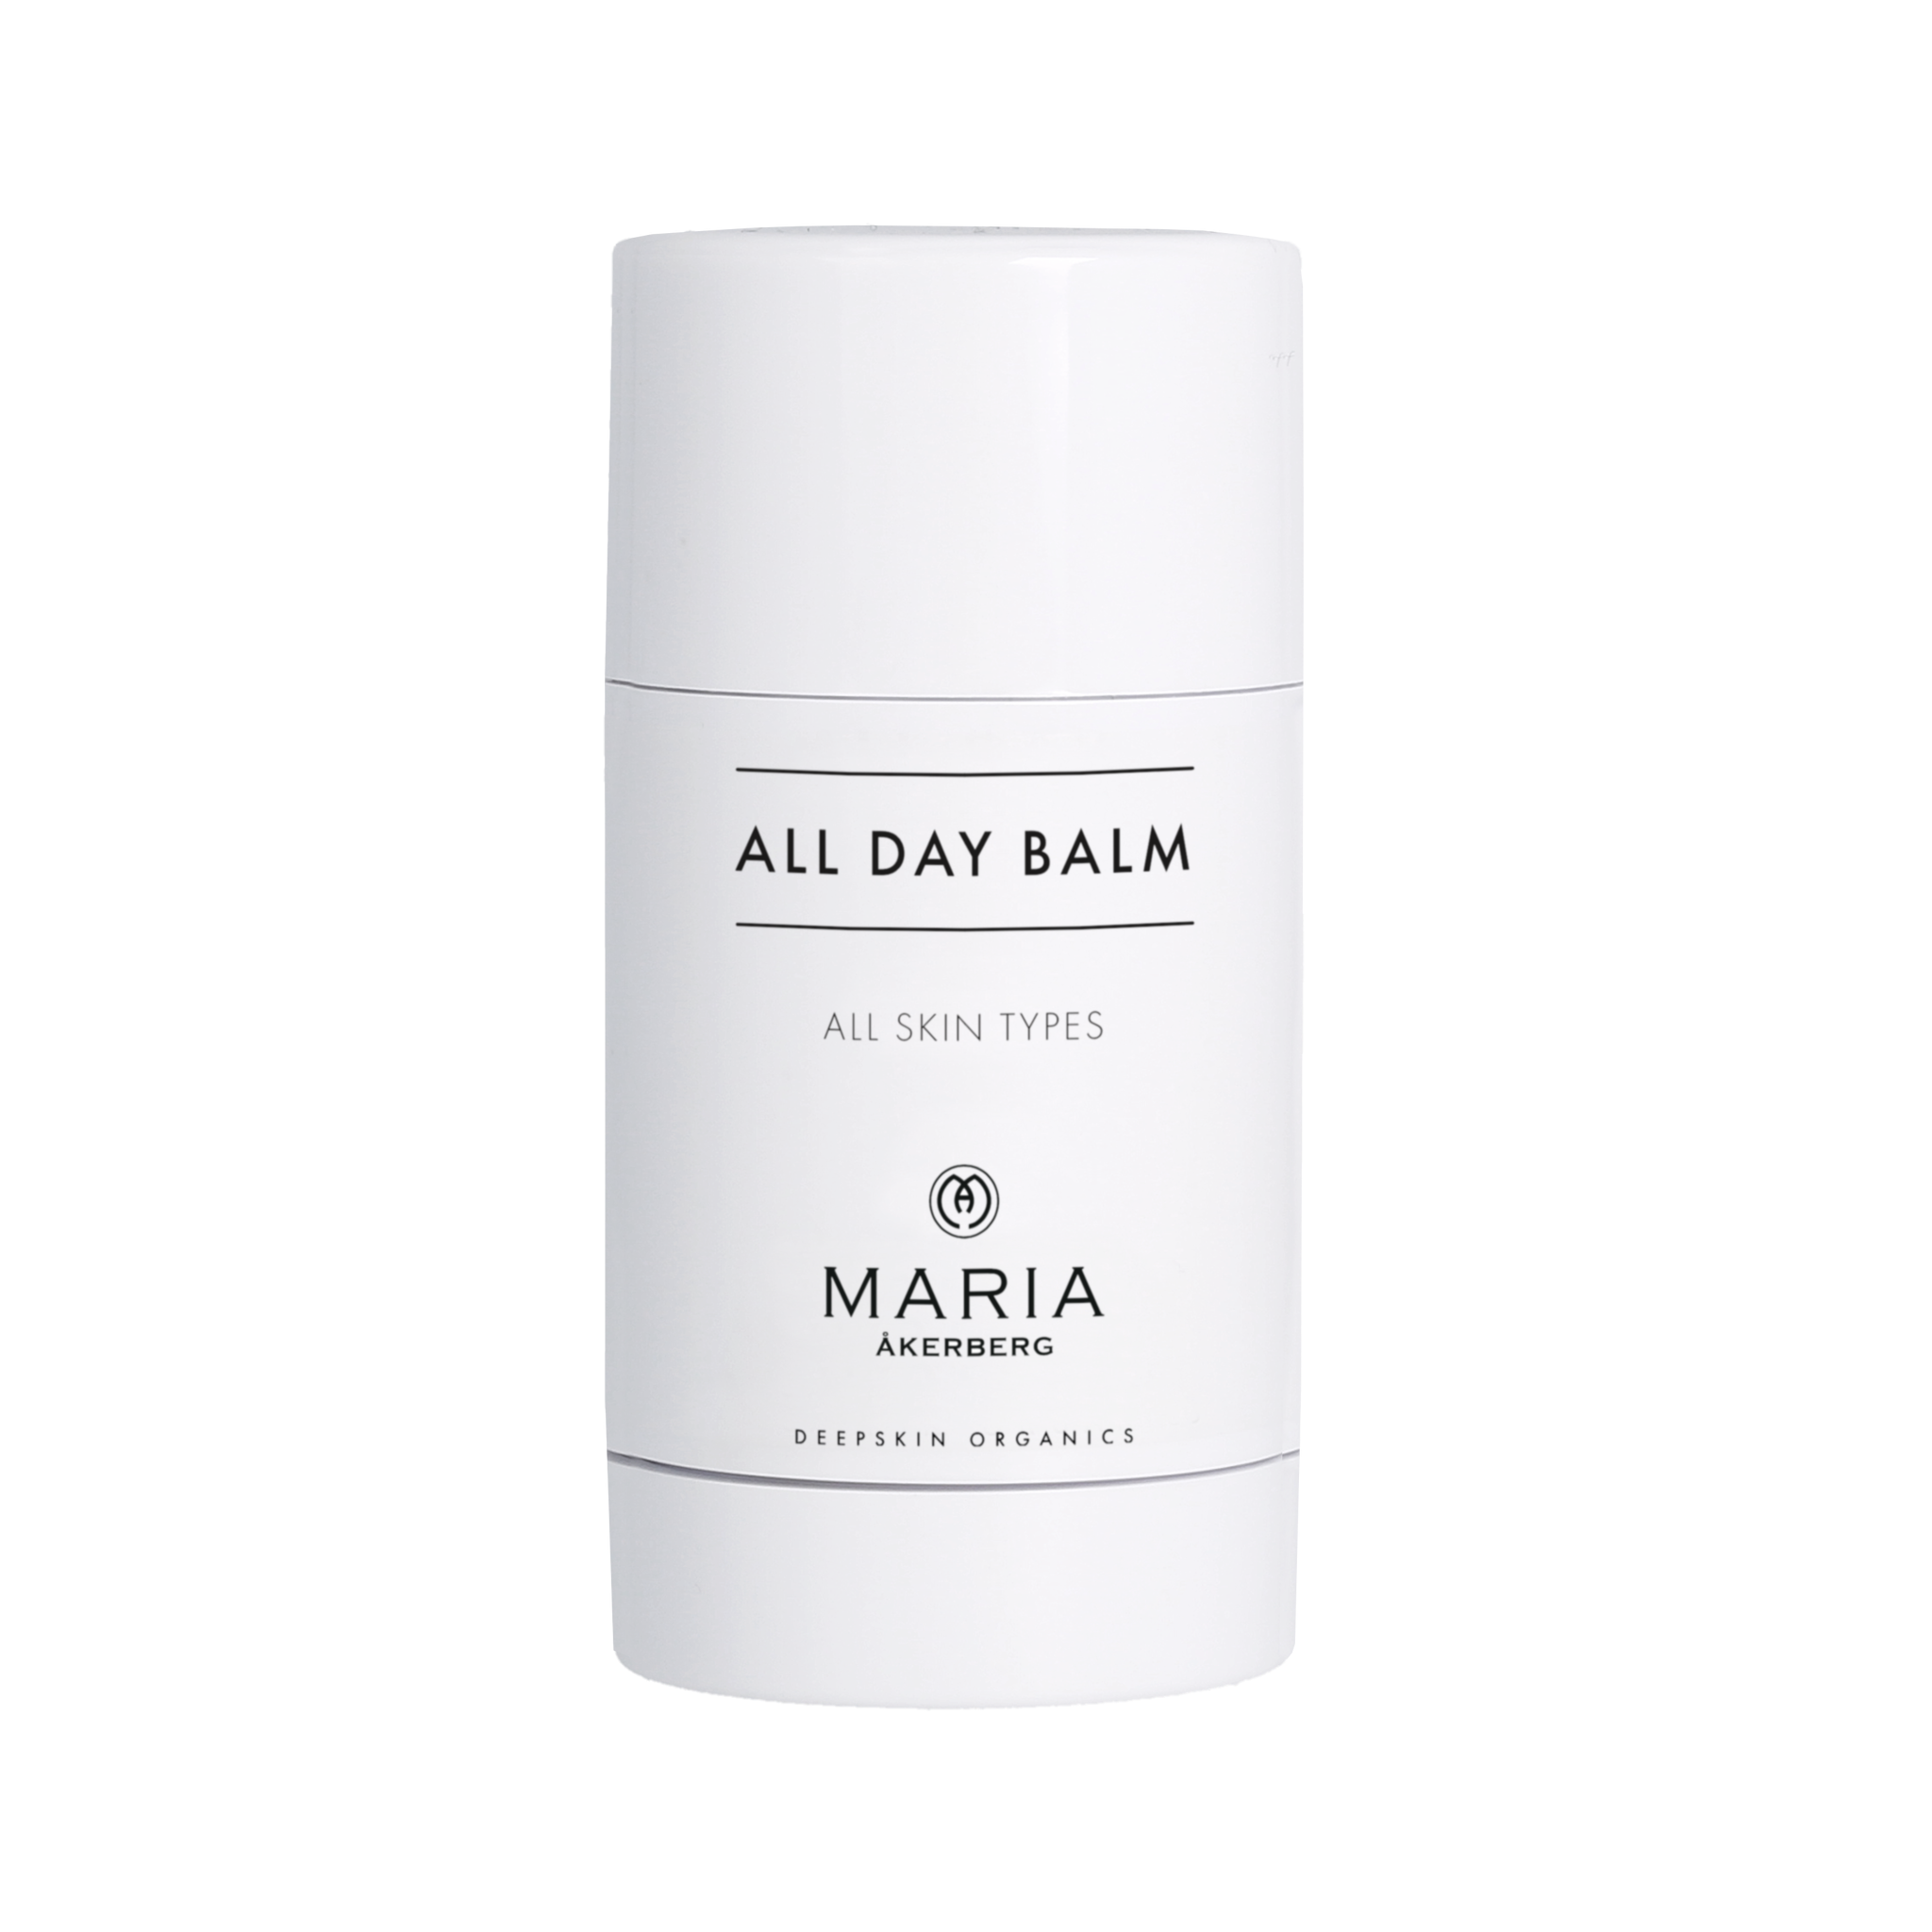 All day balm